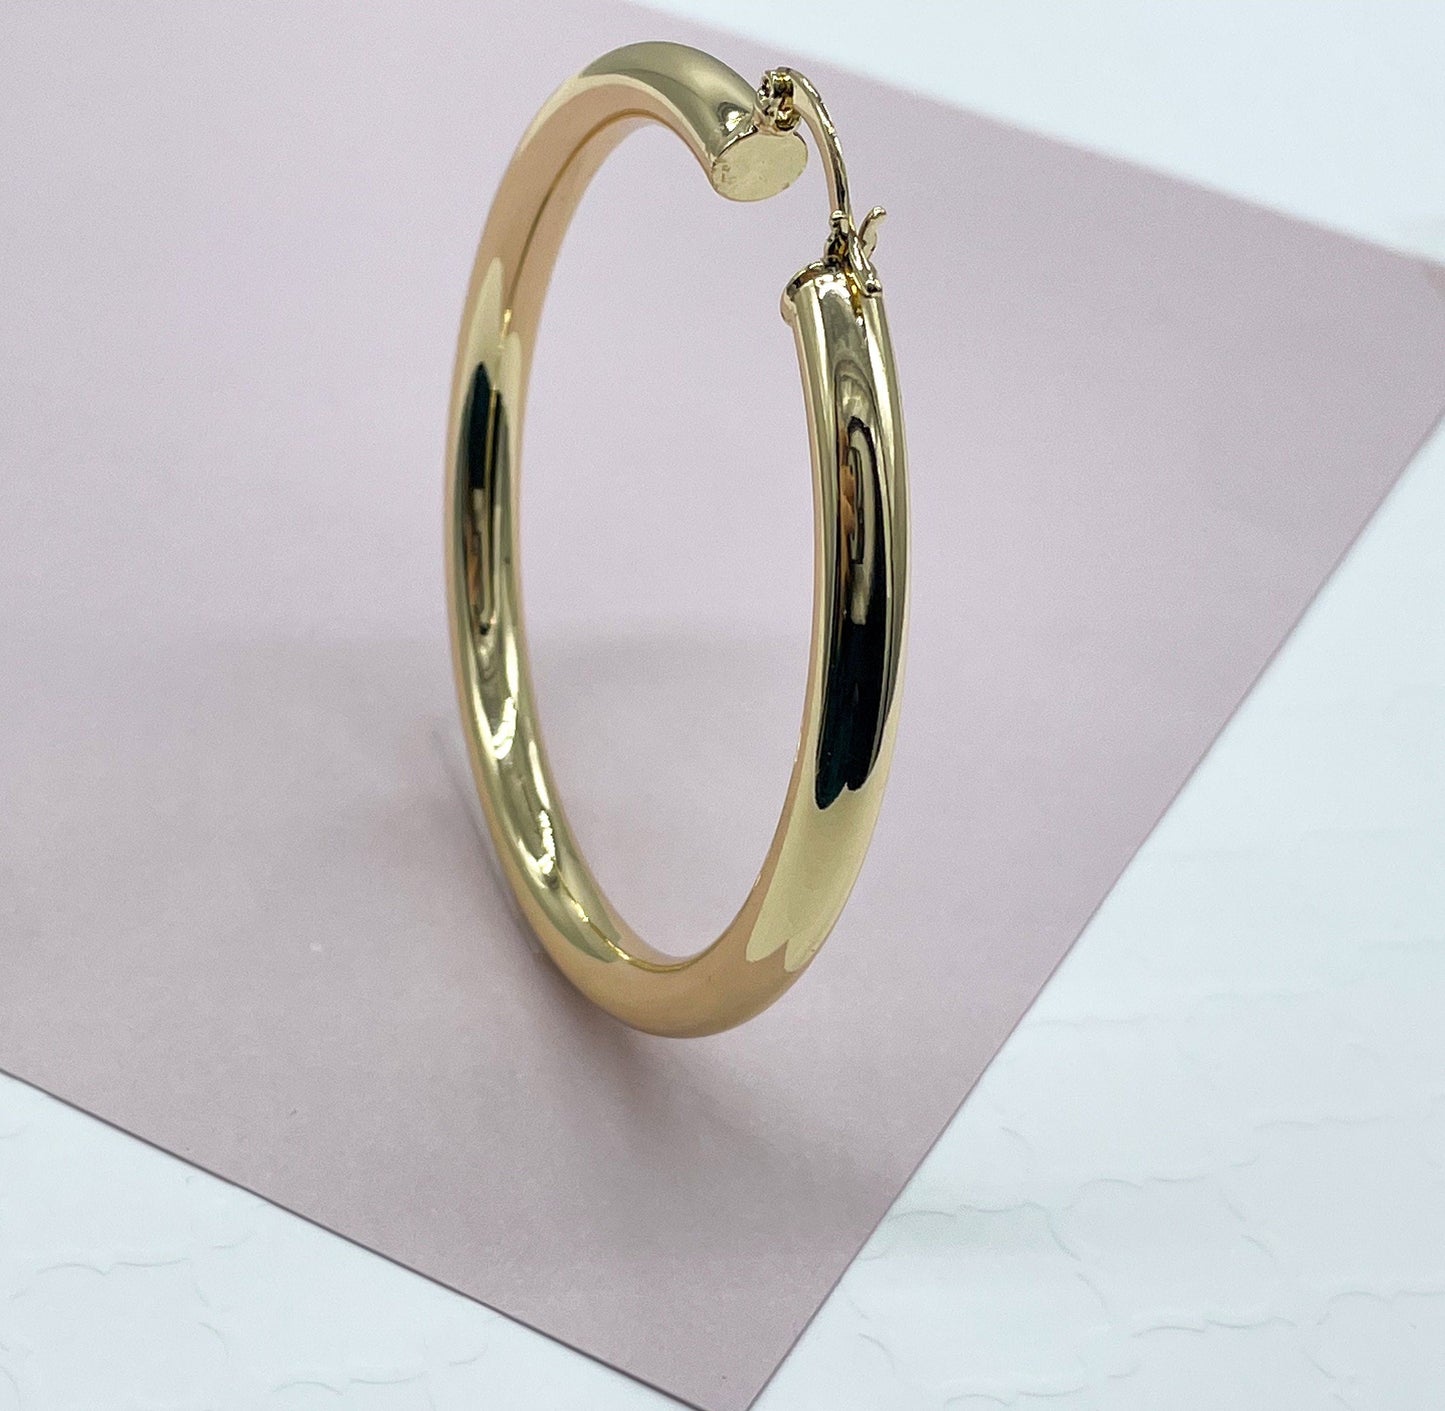 Large 18k Gold Layered Plain Hoop Earrings 2 inches or 50mm Diameter Wholesale